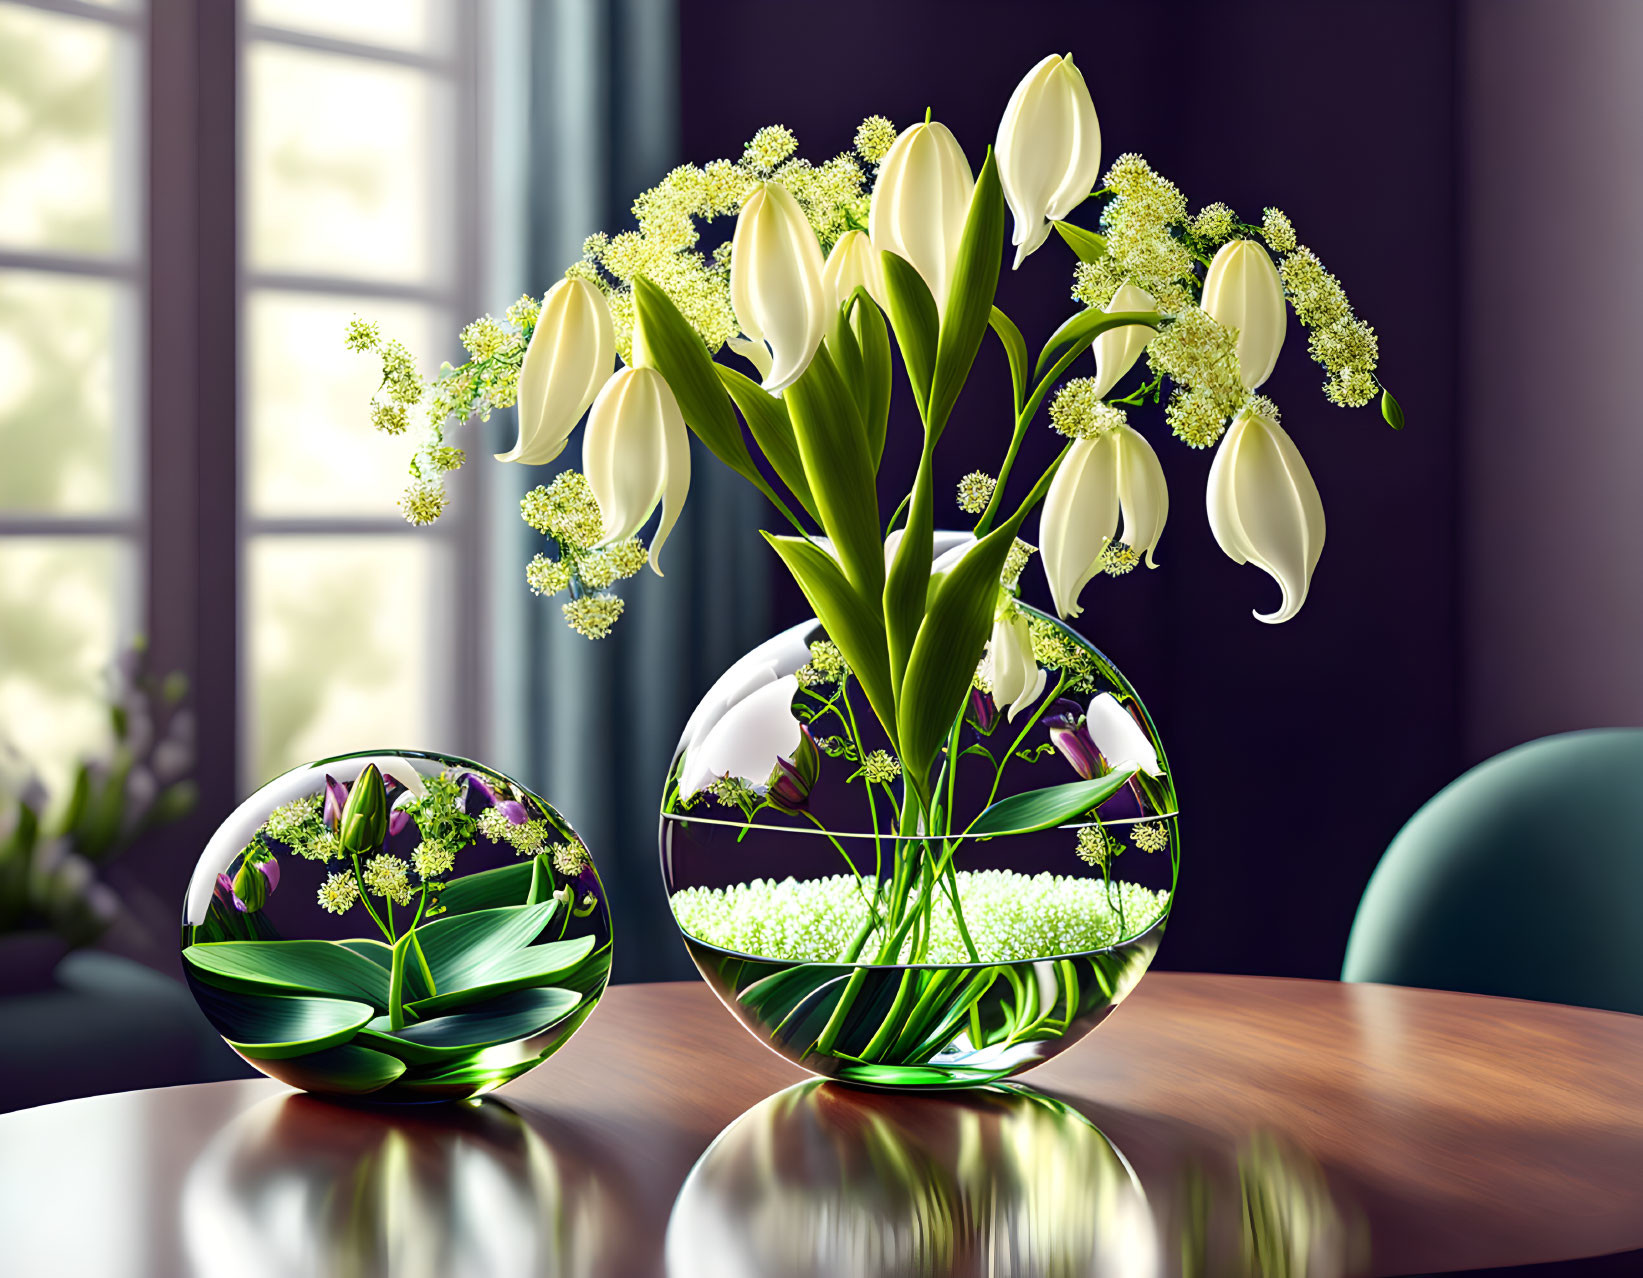 White Tulips and Greenery in Glass Vase with Orb on Wooden Table